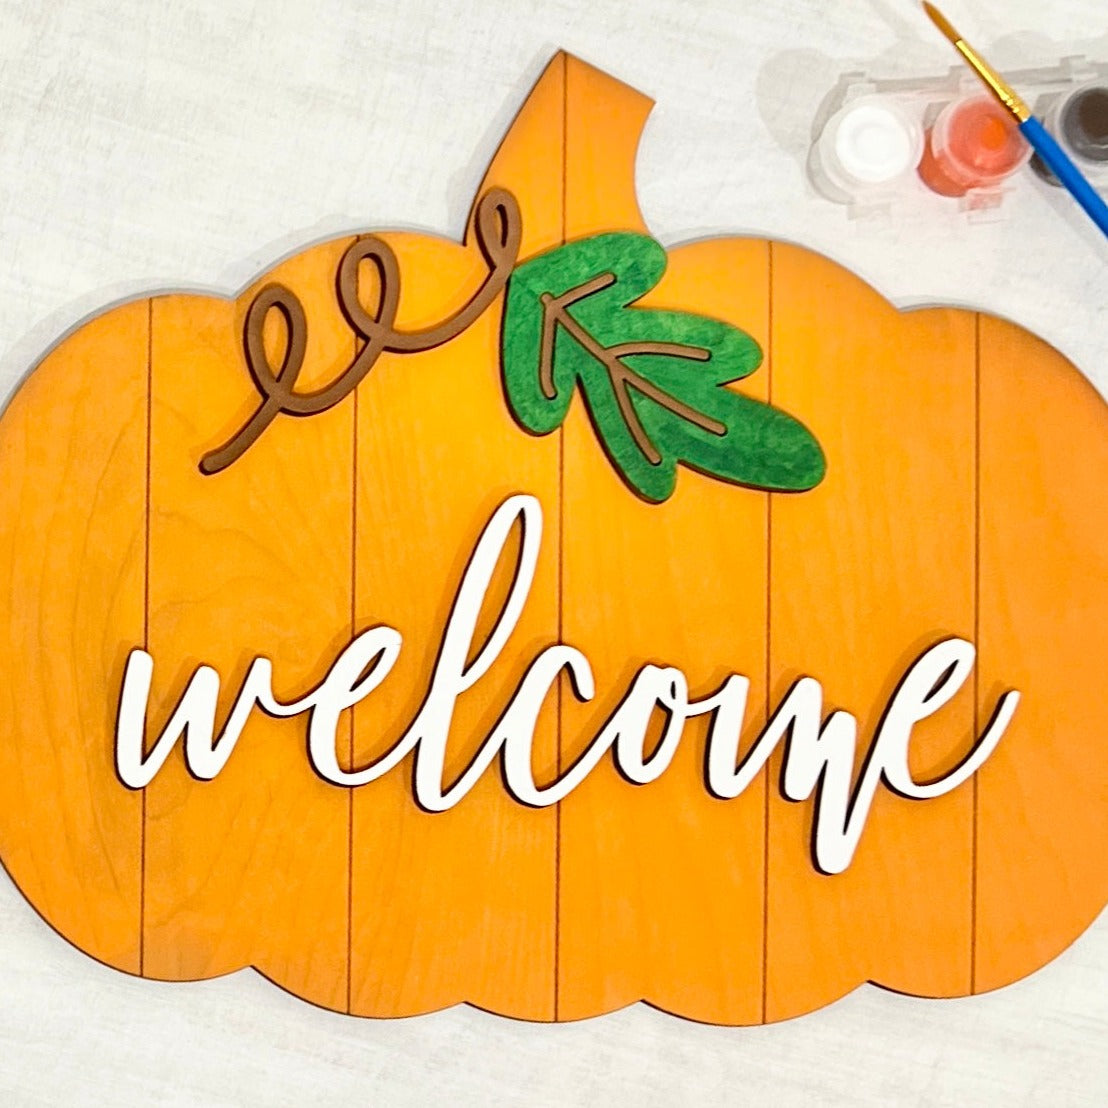 halloween pumpkin welcome sign paint kit - fall paint party kits - diy fall holiday decor - Celebrating Together